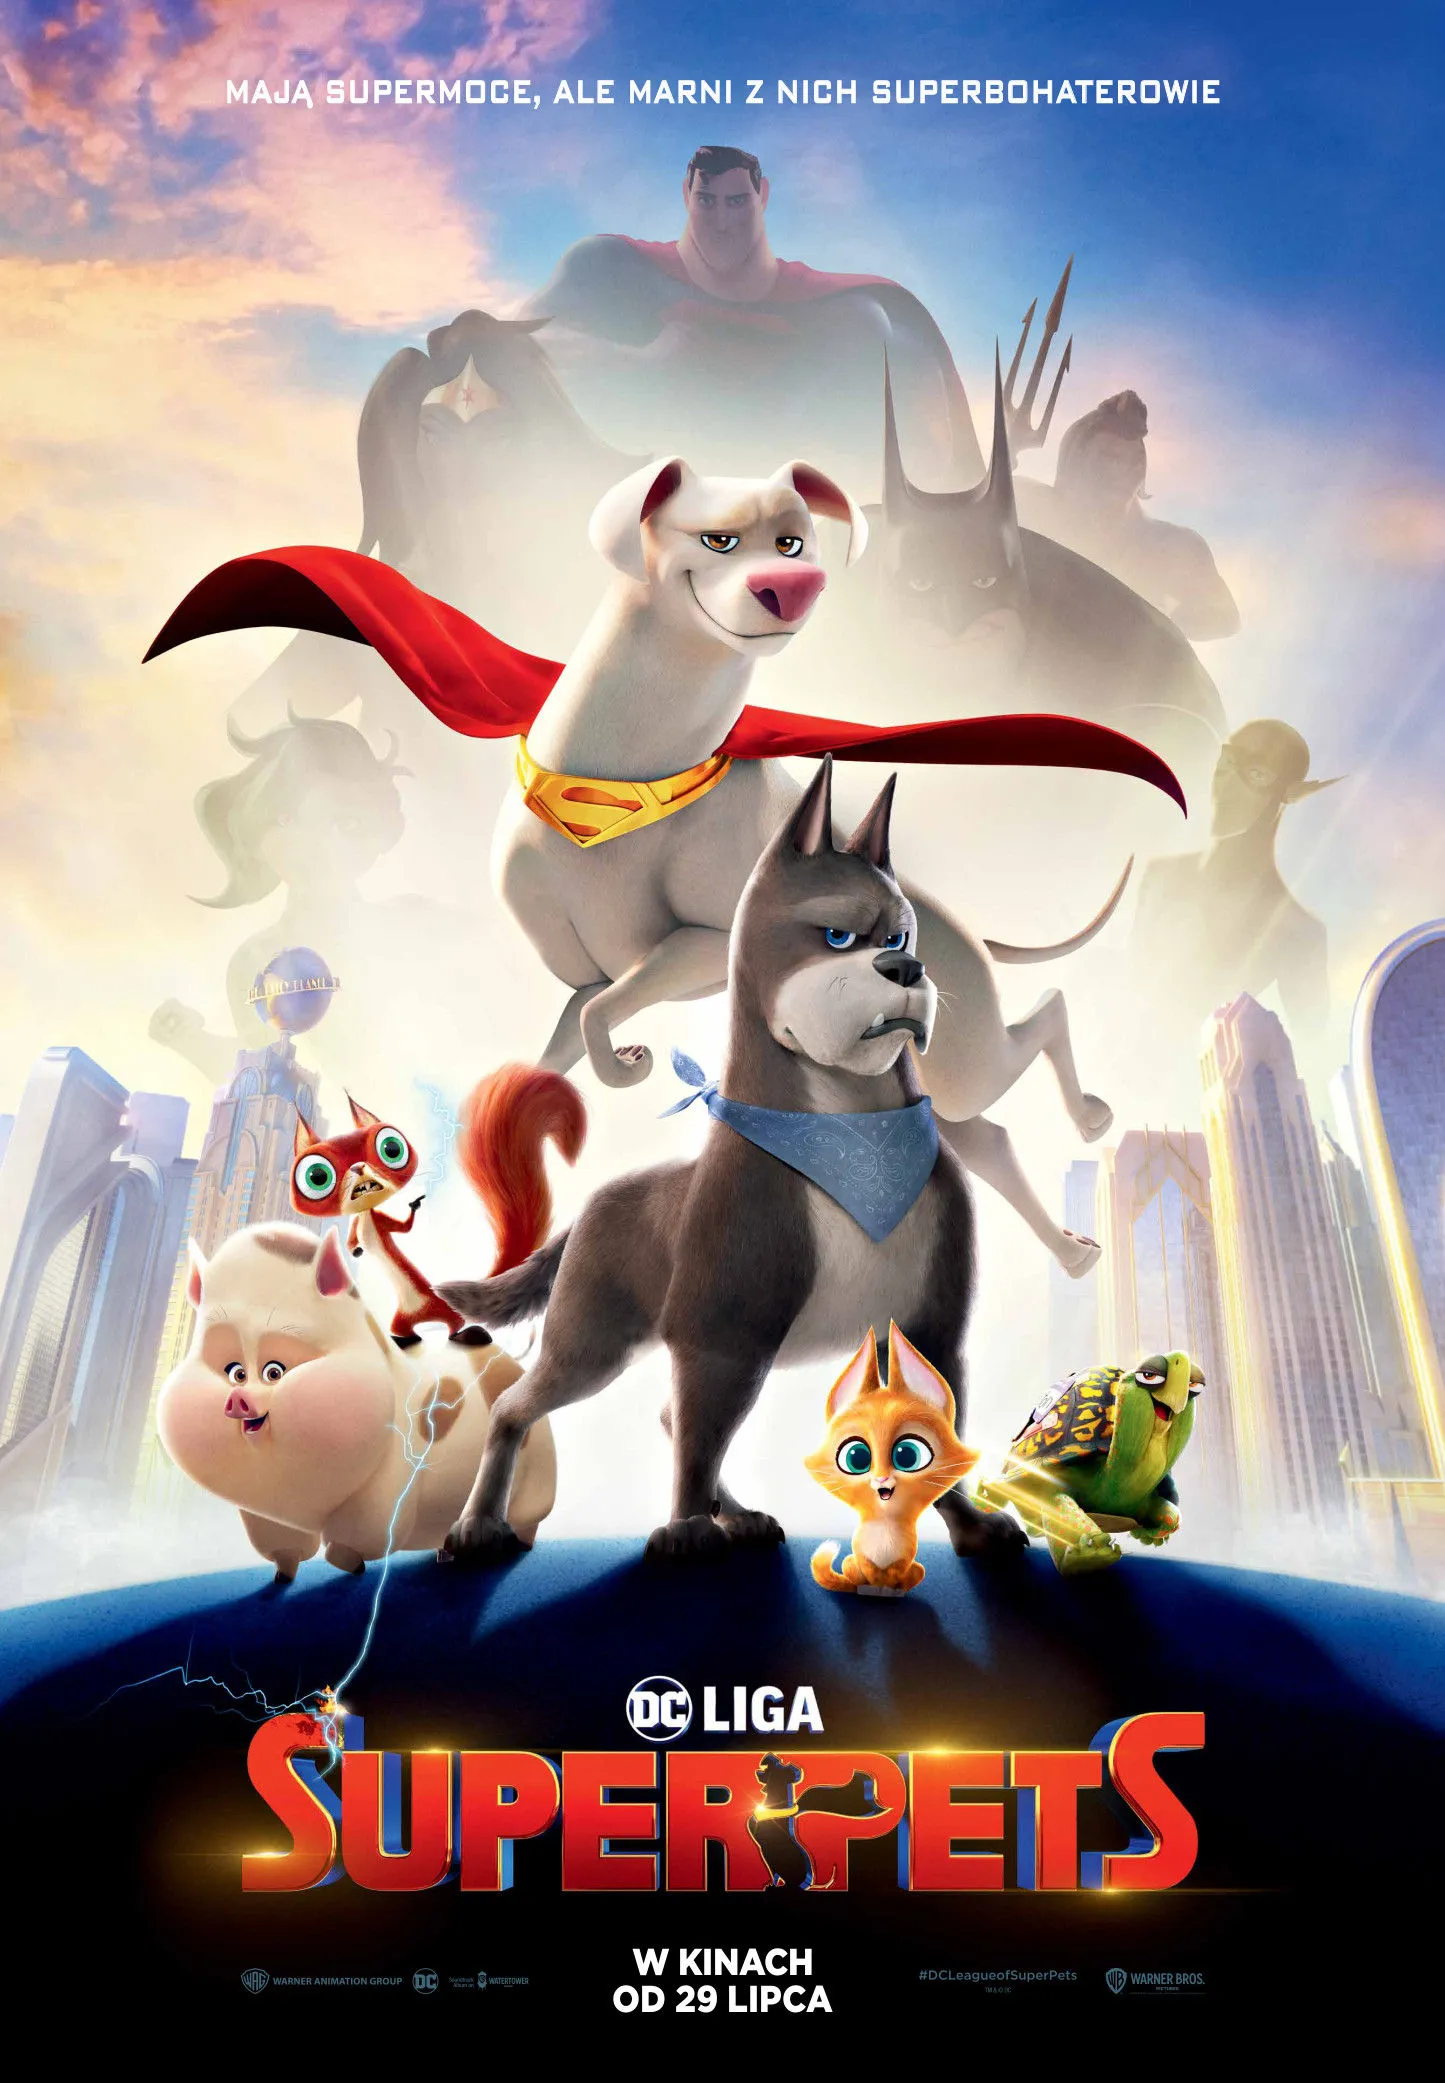 'DC League of Super-Pets' media word-of-mouth ban lifted, Rotten Tomatoes fresh rating of 85%, IGN score of 6 | FMV6